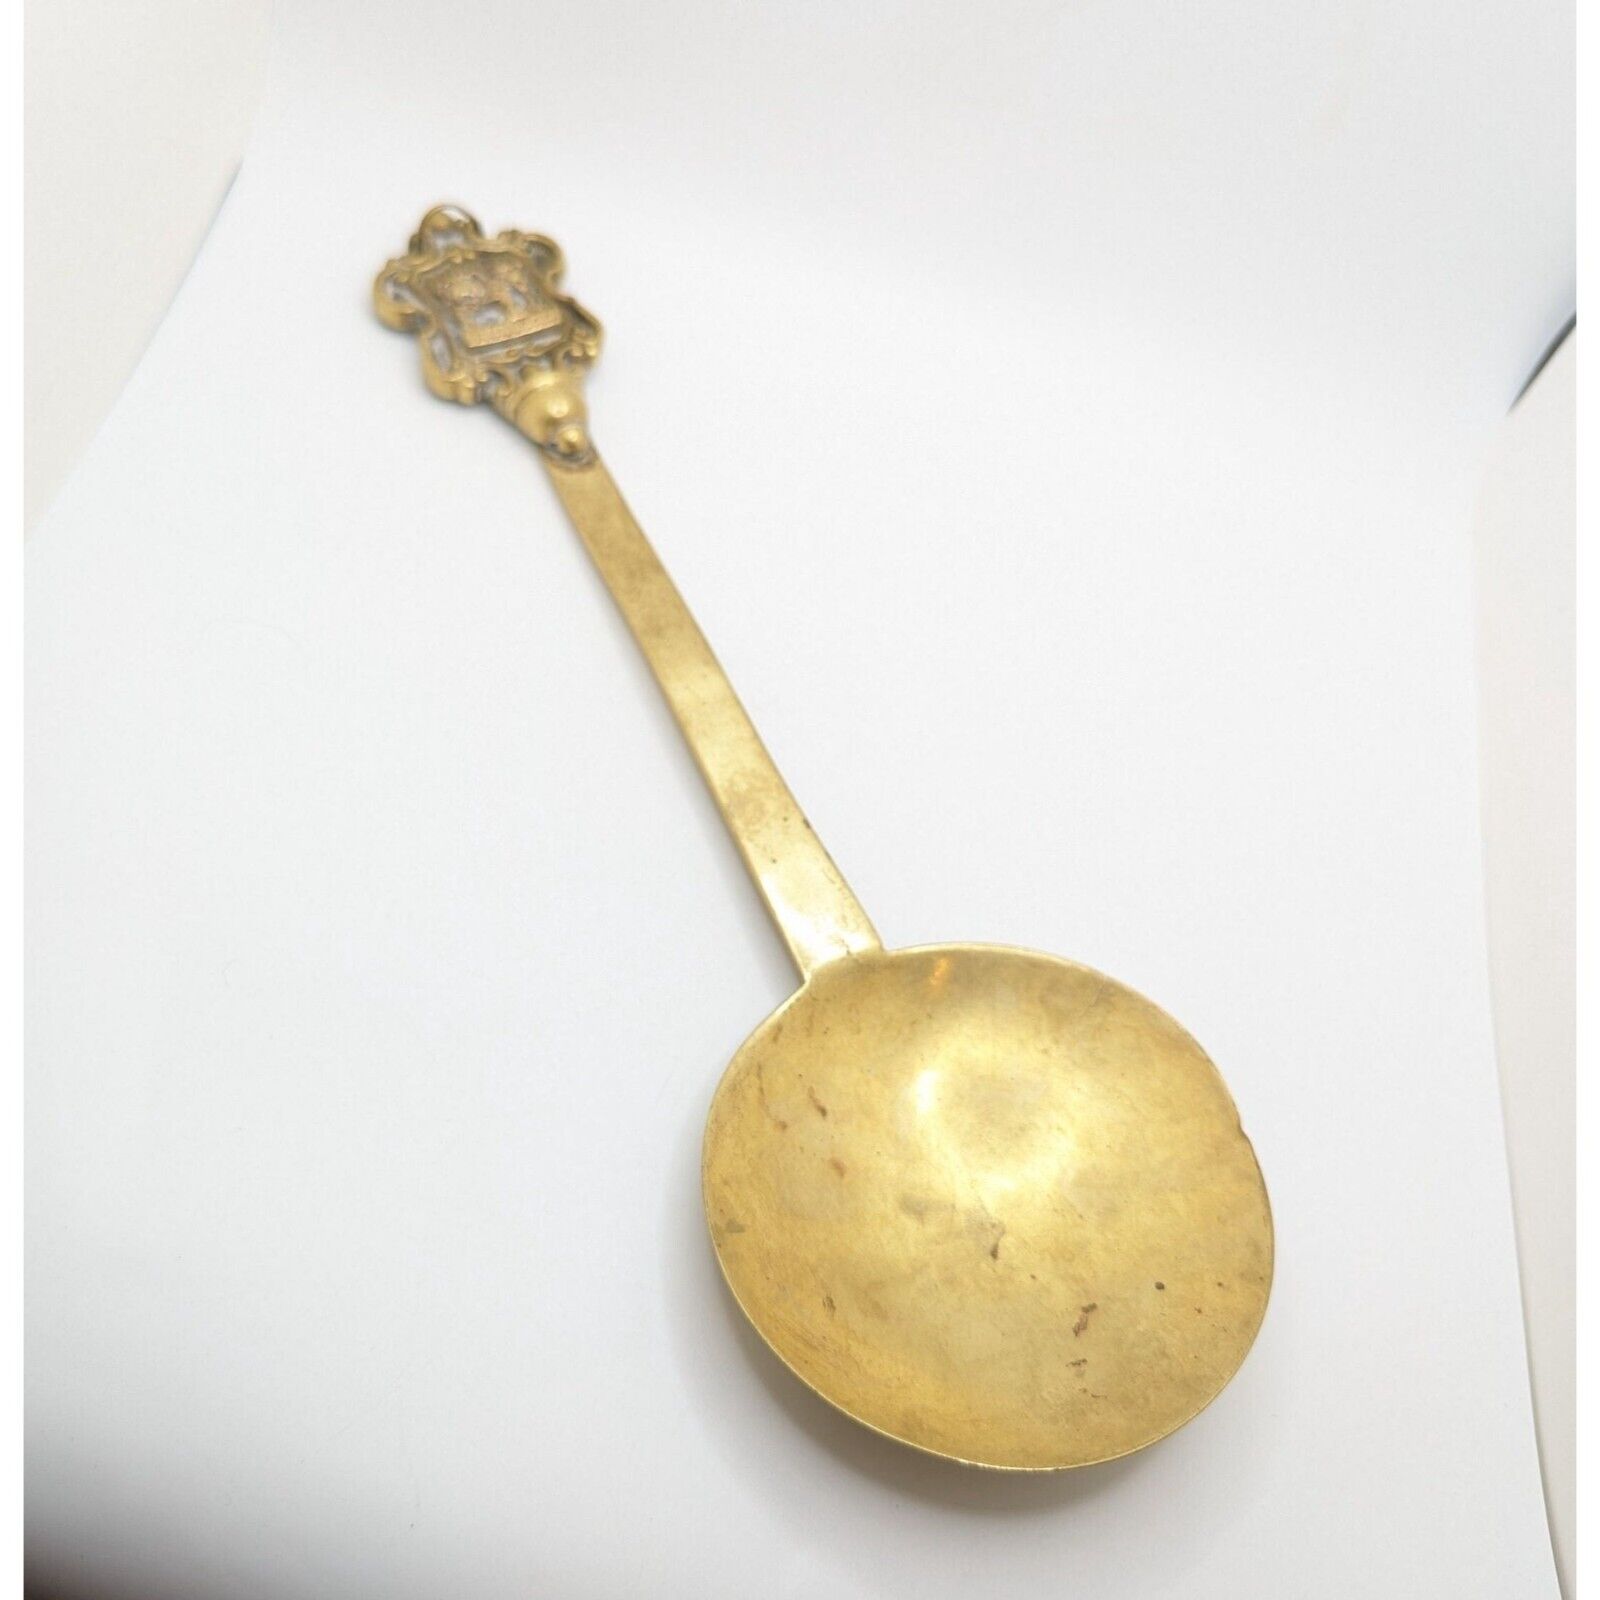 Antique Bulldog Solid Brass Spoon Utensil Serving Heavy Hanging Rare Yale Univer